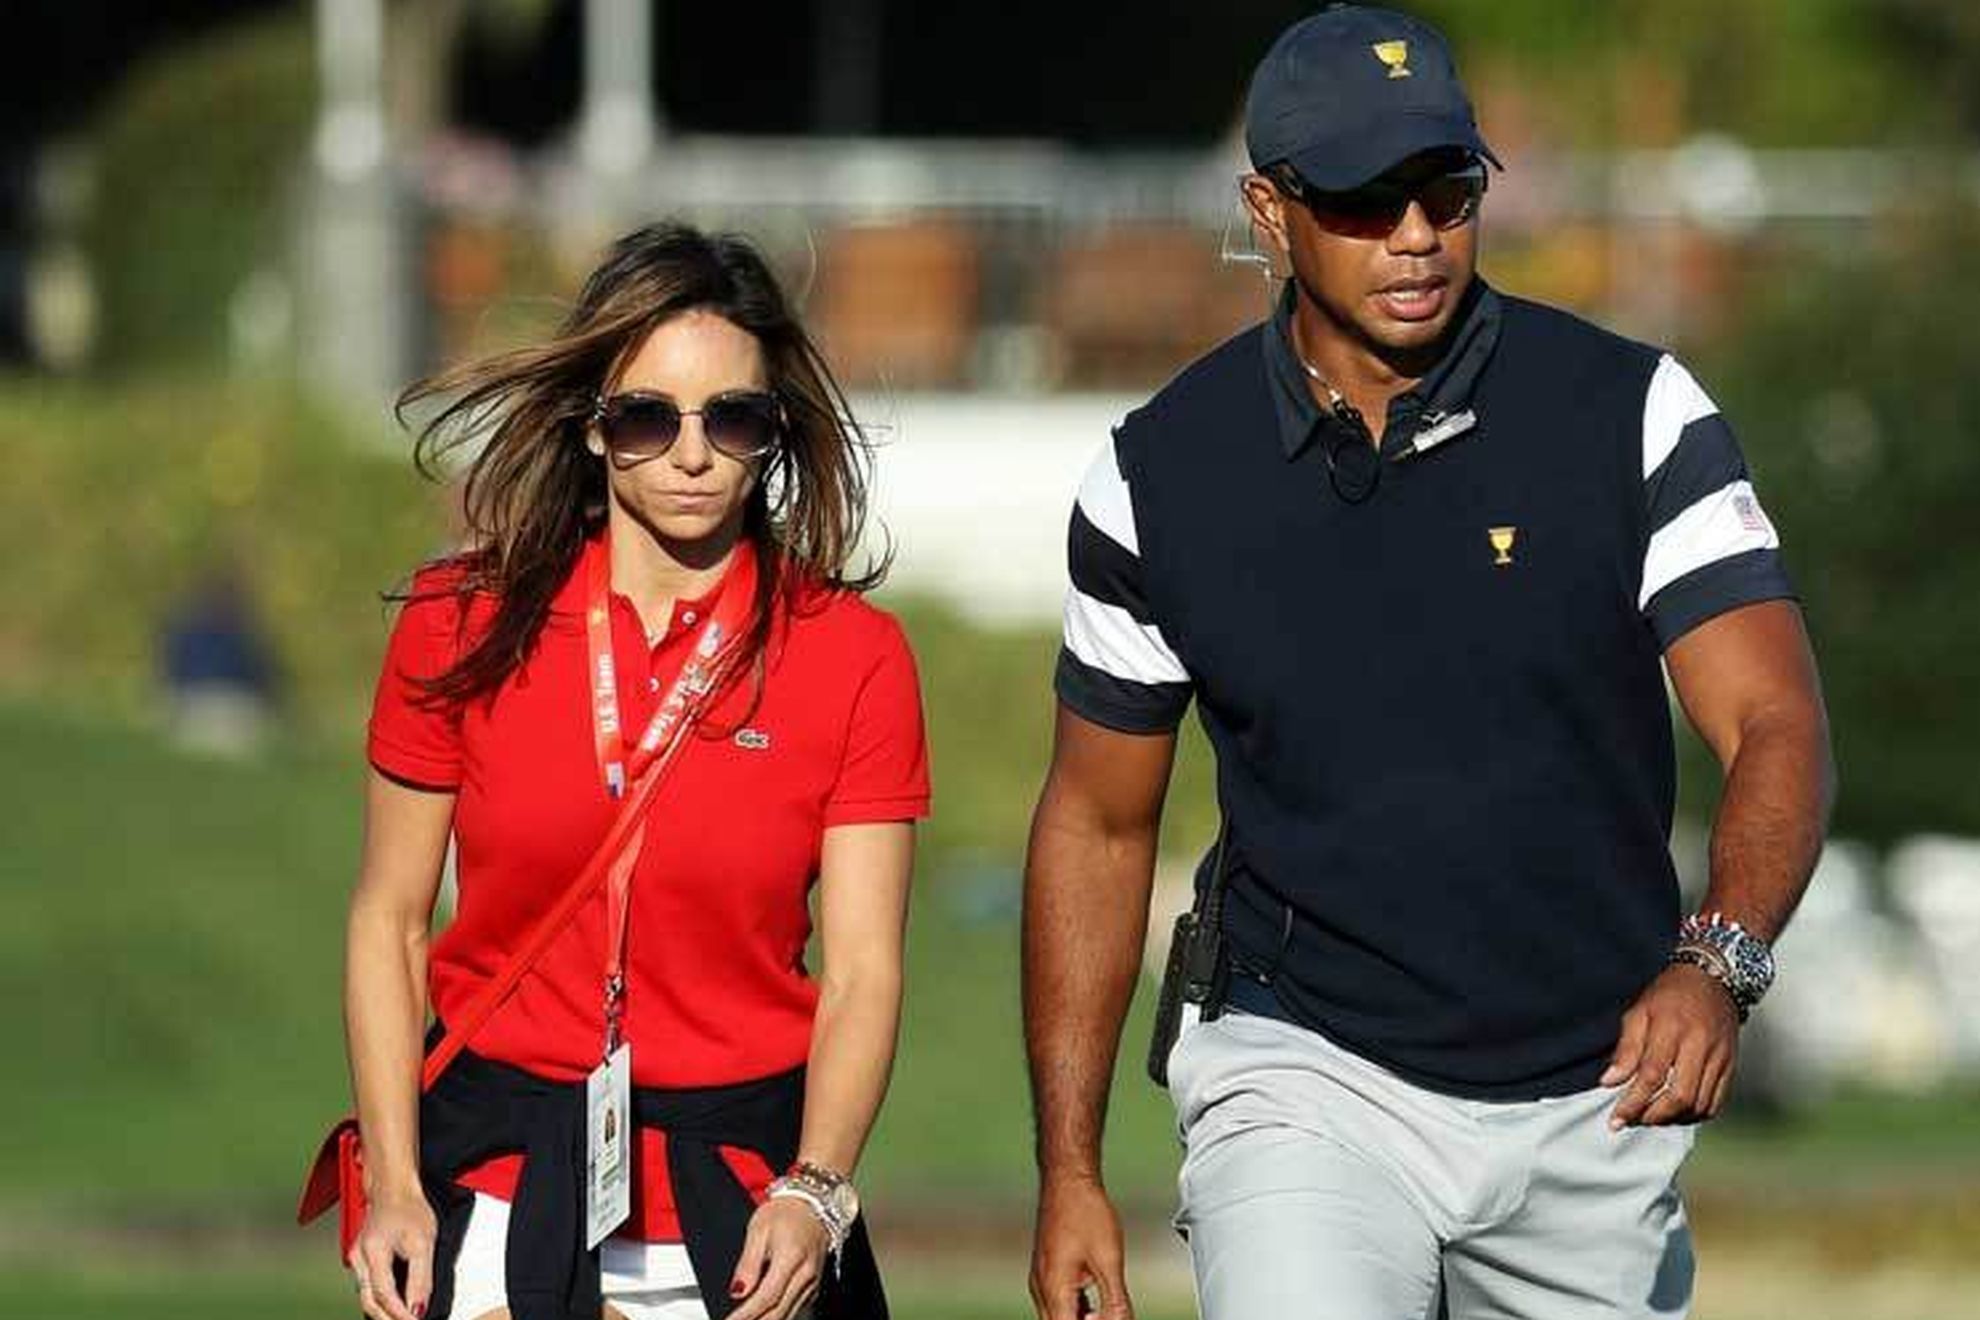 Tiger Woods avoids big trouble, gets ex-girlfriend Erica Herman to leave him alone